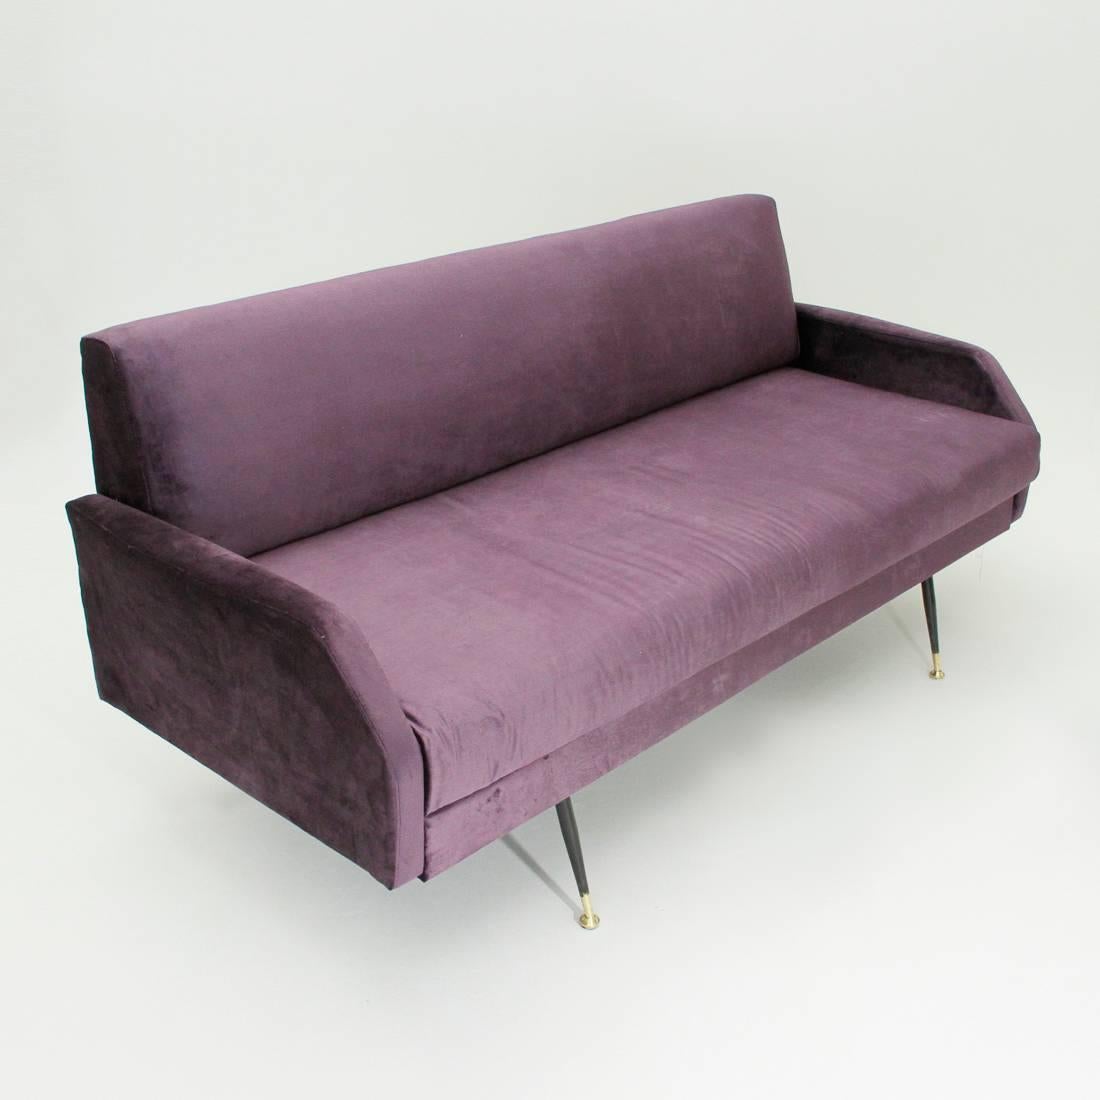 Sofa bed of Italian production 1960s.
Structure and cushion padded and lined with new purple velvet fabric.
Base in black painted metal.
Legs in black painted metal with brass feet.
The seat flows forward and becomes a bed.
Good general